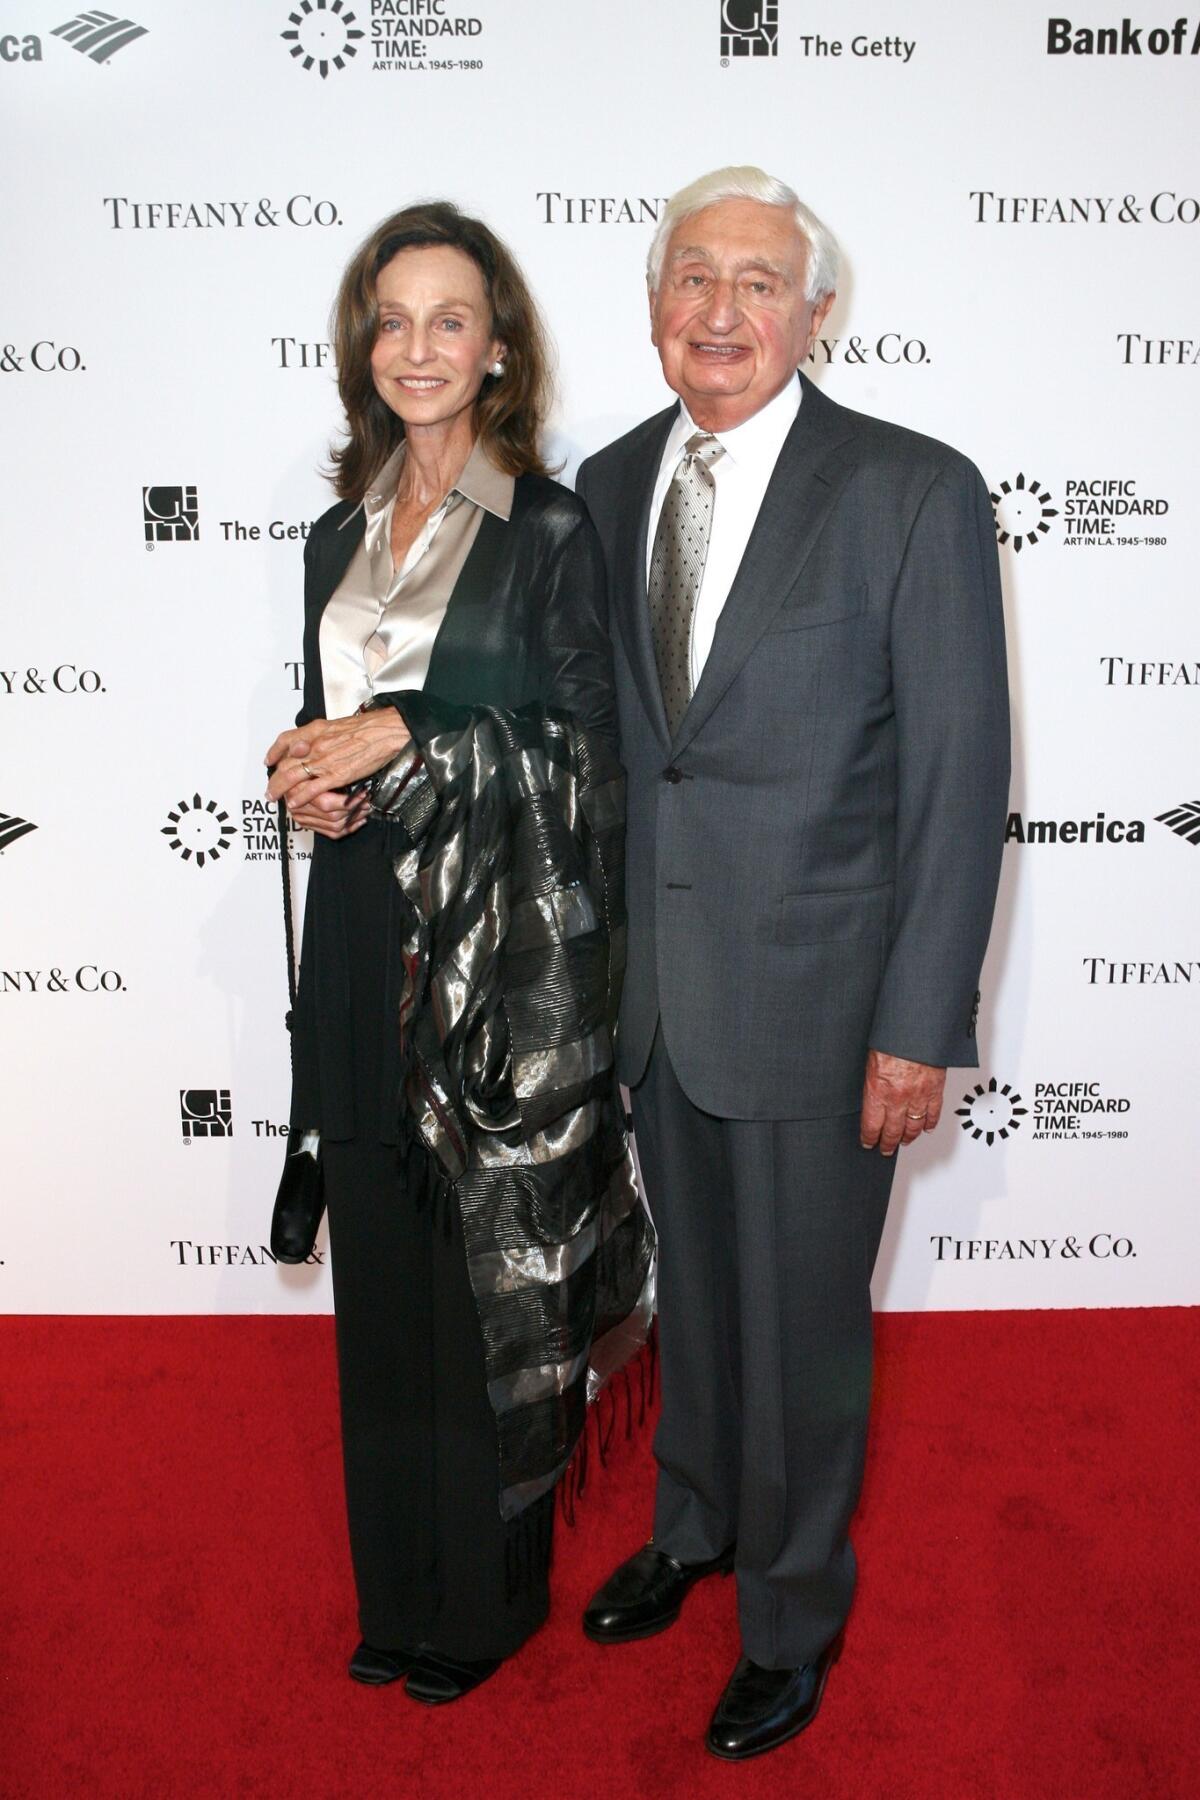 Nancy Englander and Harold Williams arrive at the "Pacific Standard Time: Art in LA 1945-1980" opening event at the Getty Center in 2011.